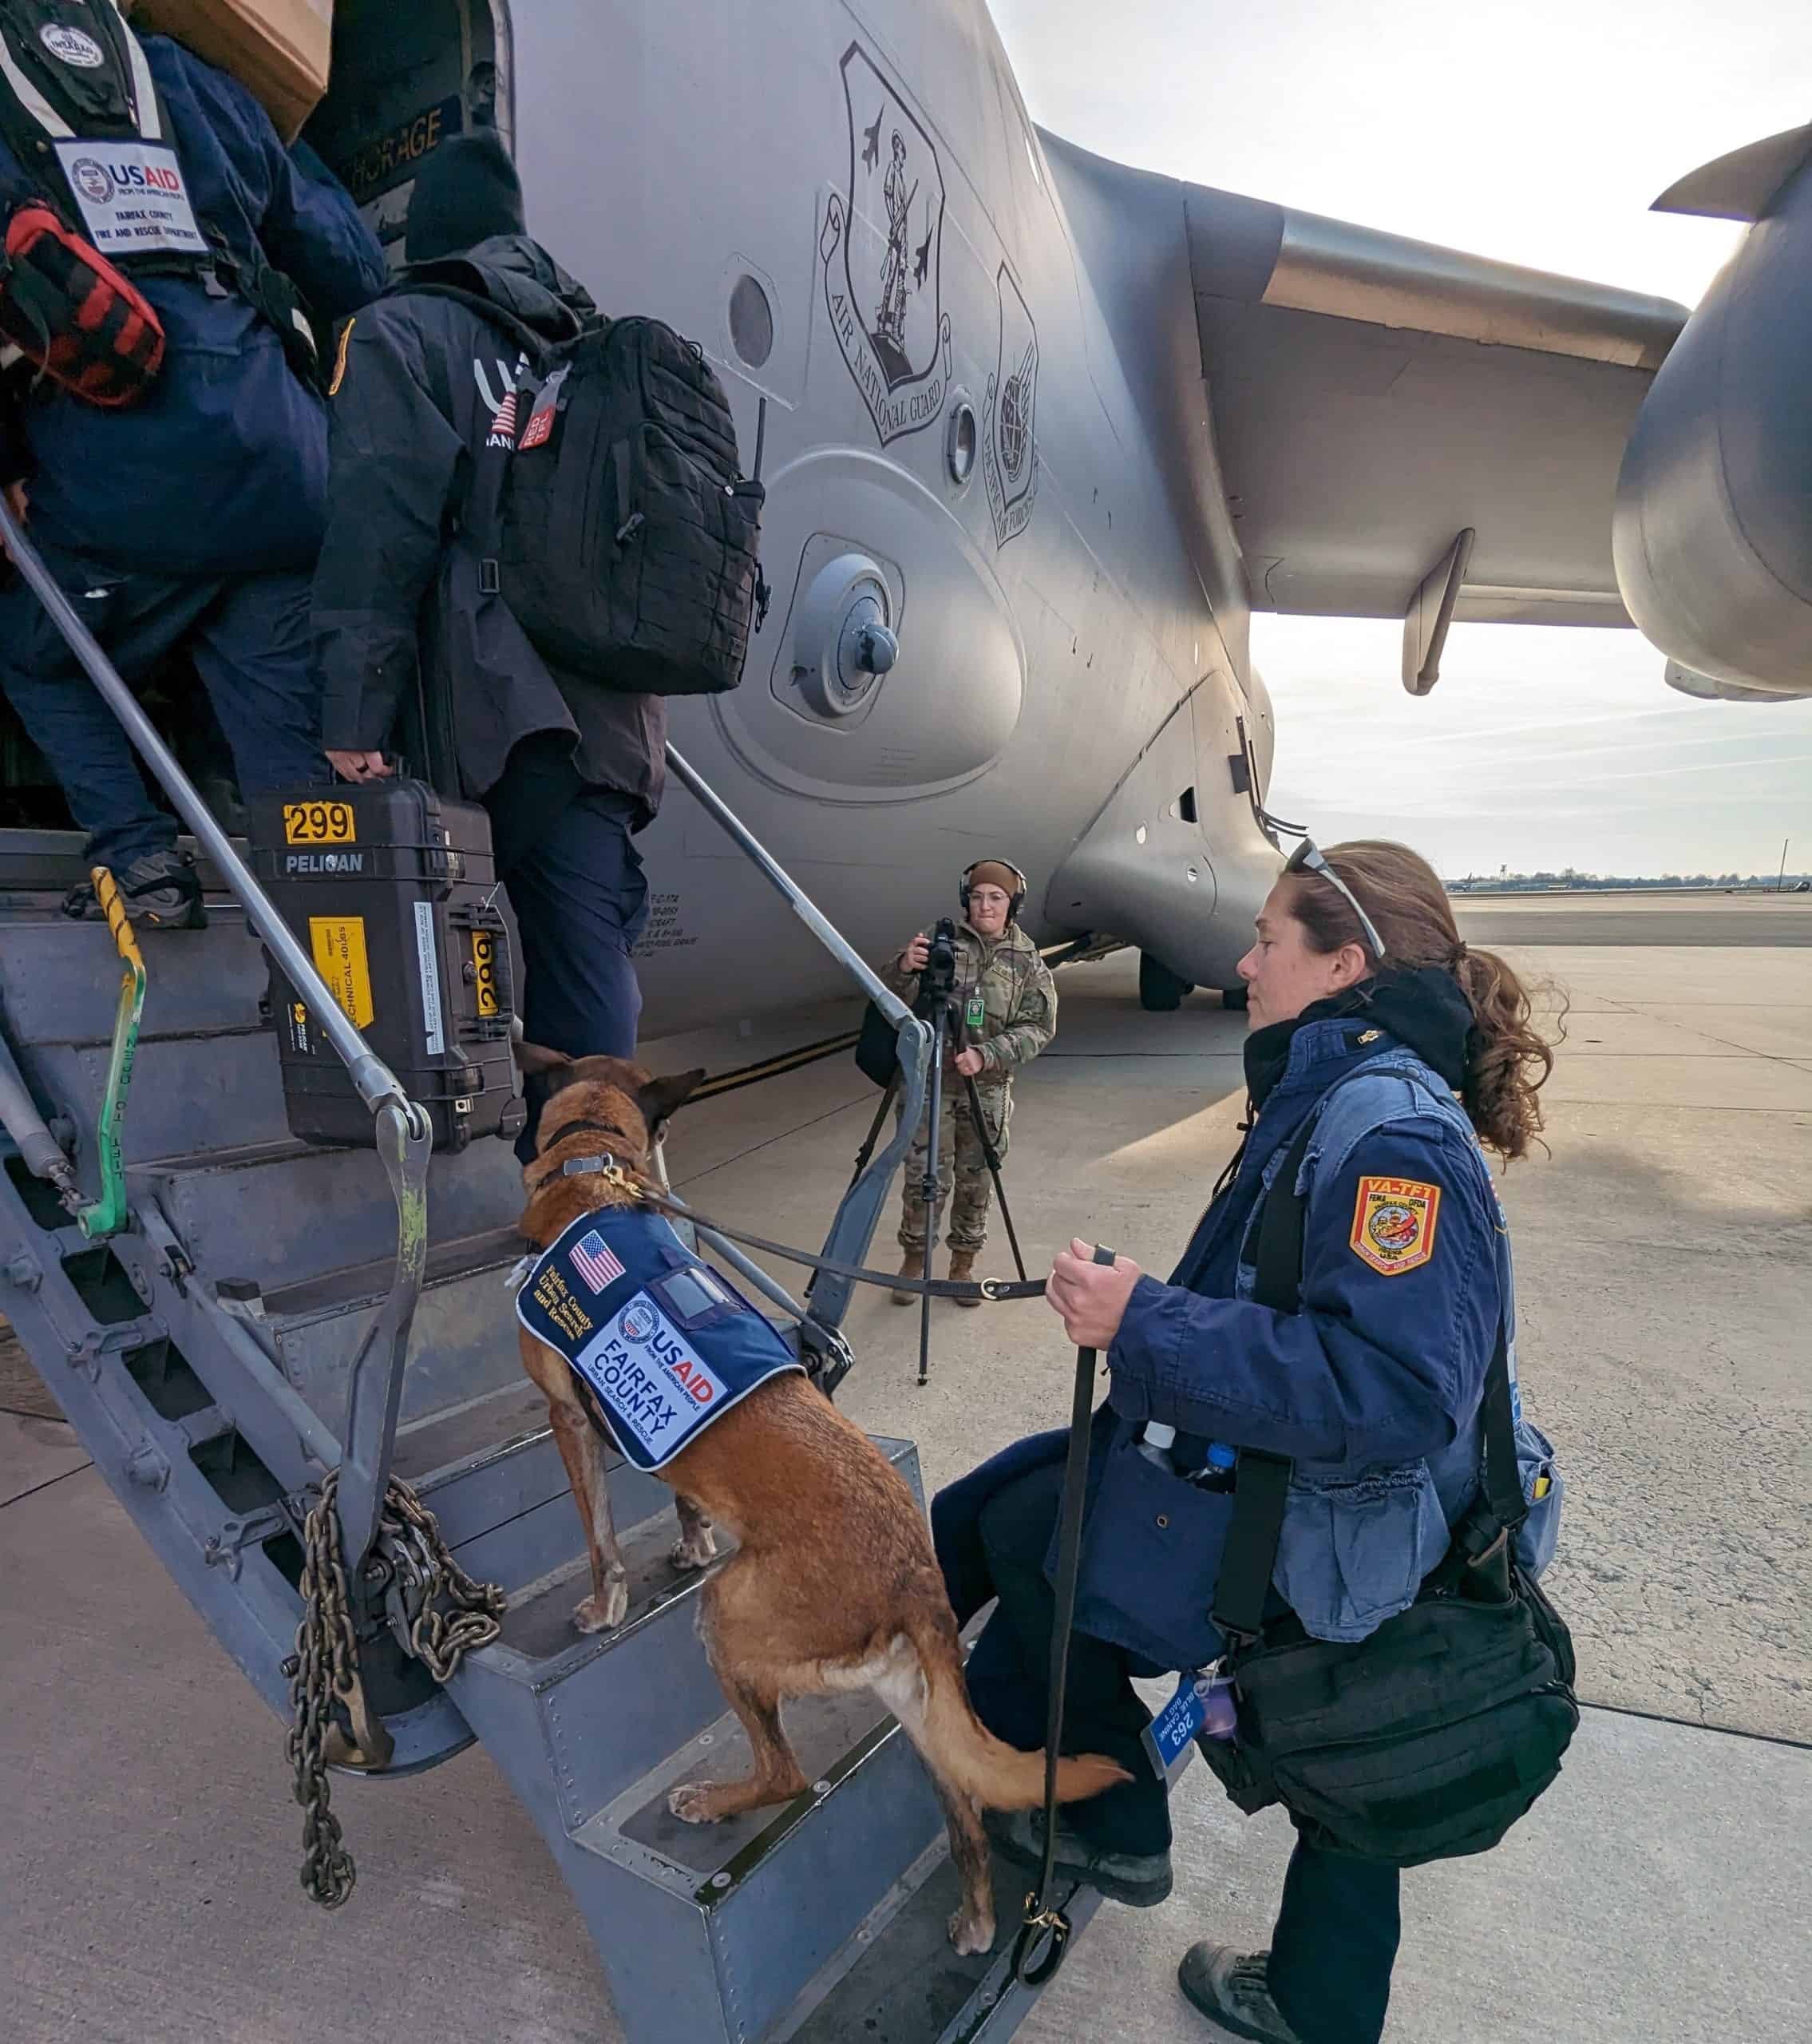 brave search and rescue dogs from the USA